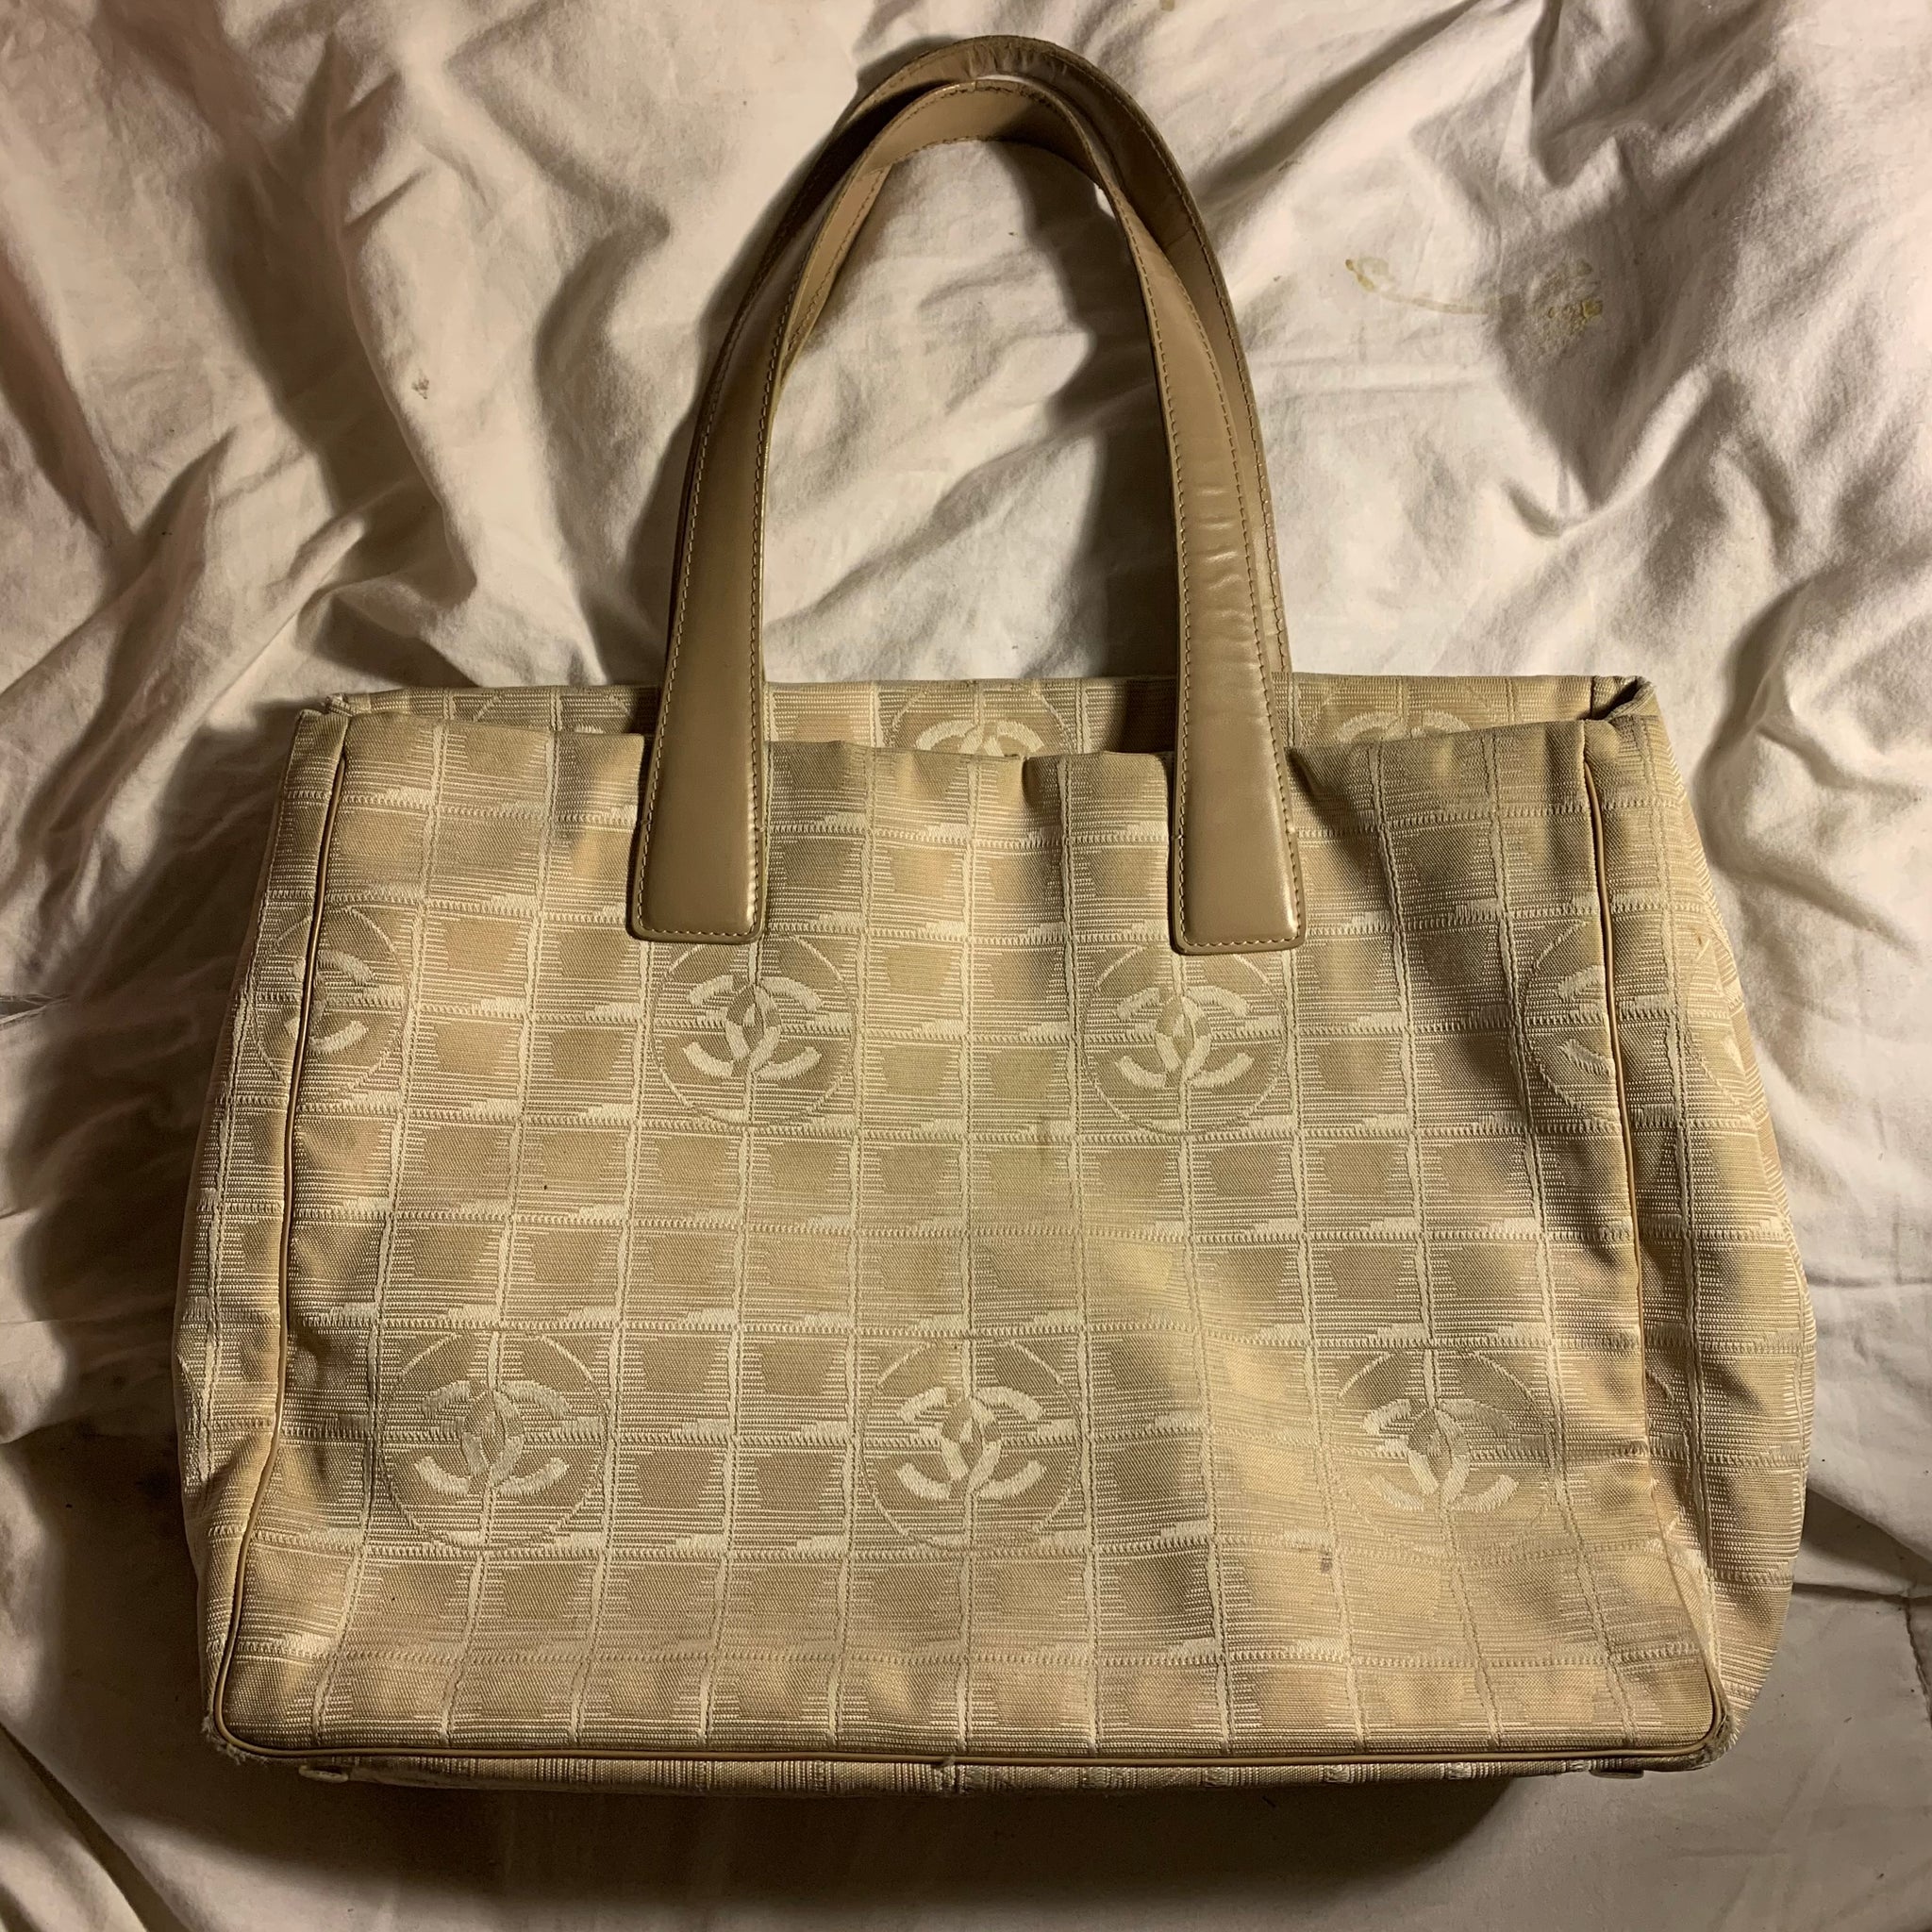 Auth CHANEL New Travel Line Beige Nylon and Leather Tote Shoulder Bag #54299